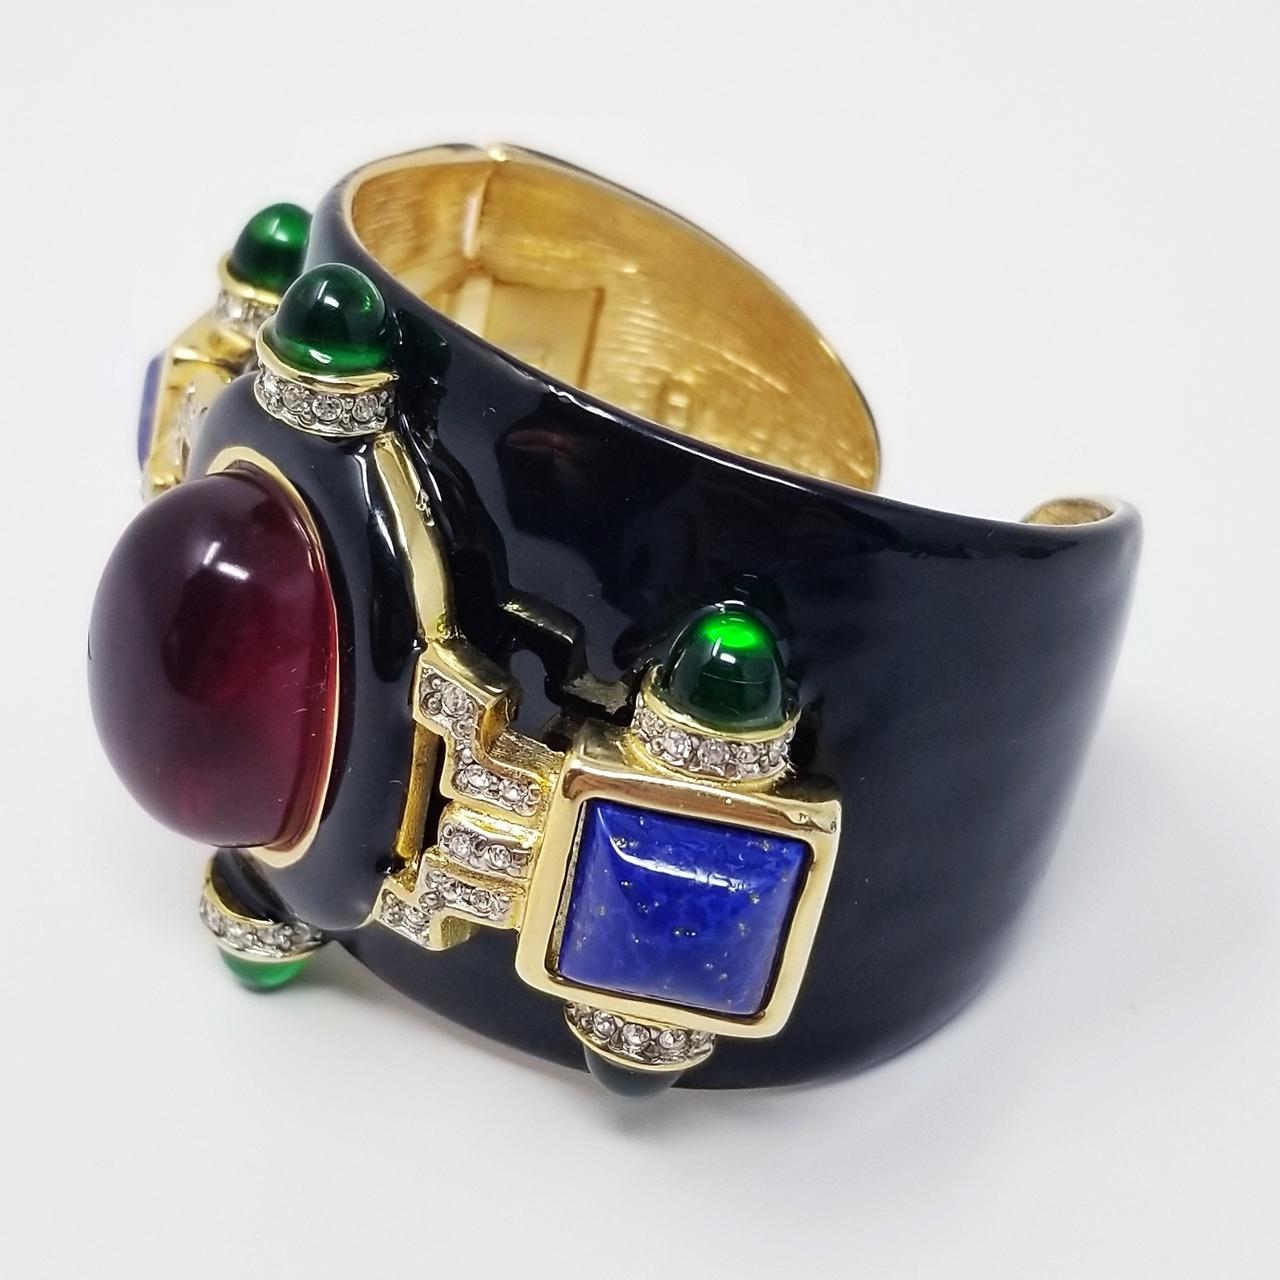 Kenneth Jay Lane cuff bracelet. Black enamel and 22KT gold plated. Ruby resin cabochon centerpiece accented with faux emerald, lapis lazuli, and clear crystals.

...

Measurements: inner circumference 6